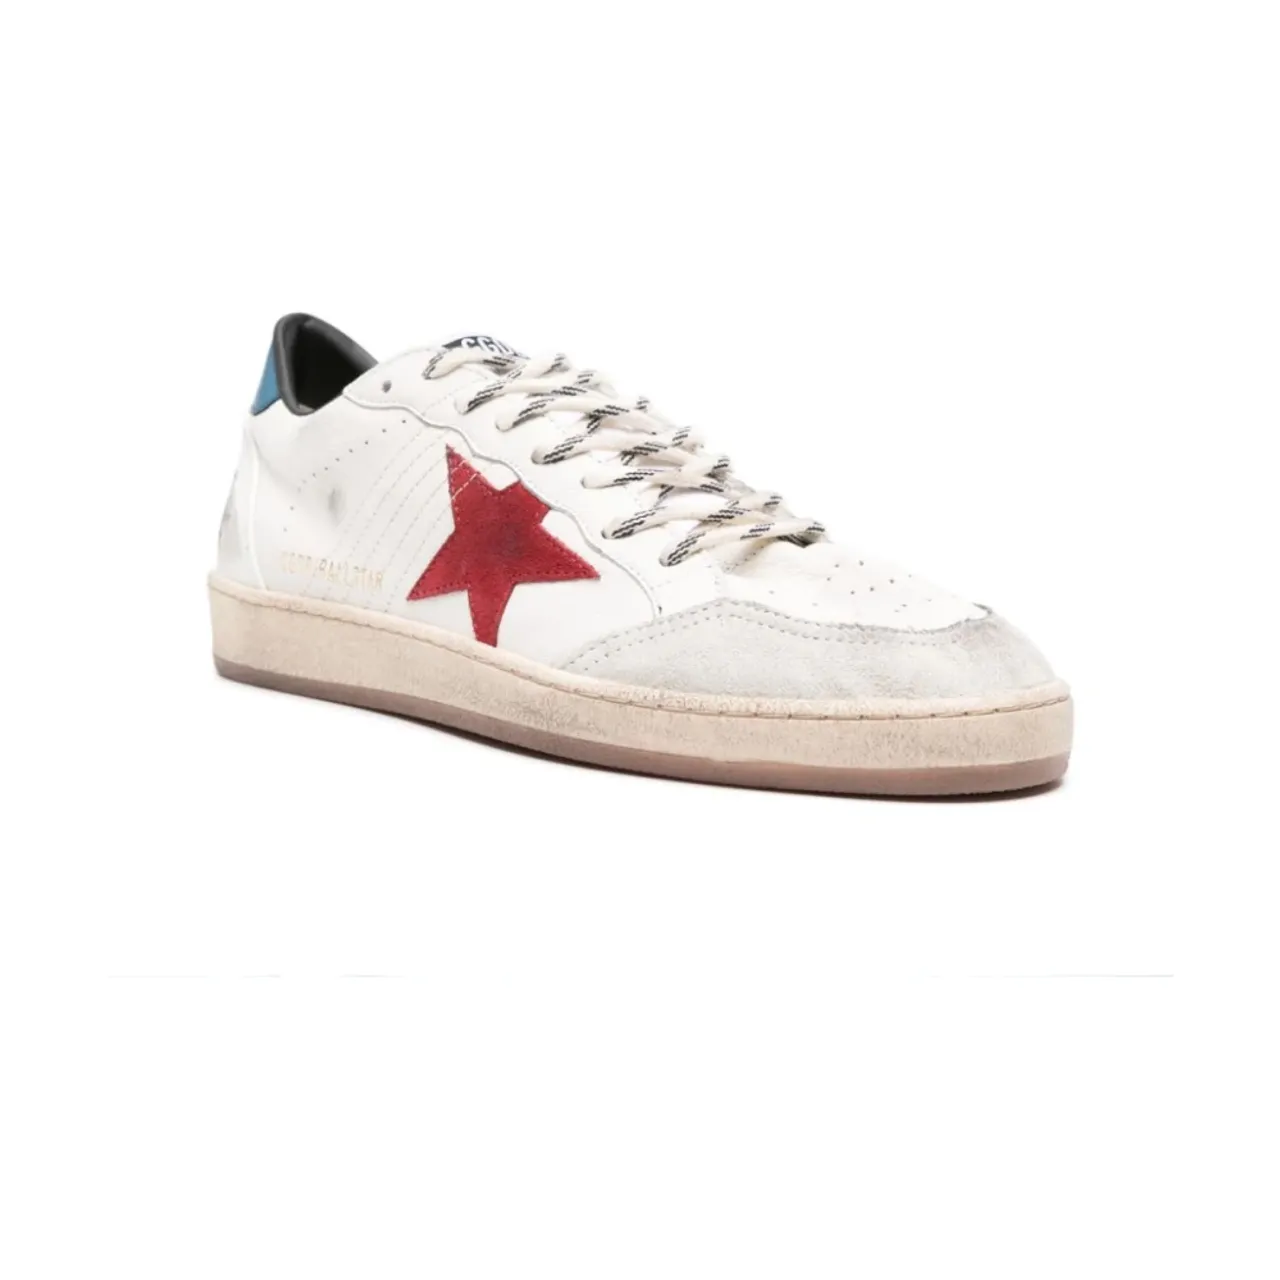 Weiße Ball Star Sneakers Distressed Finish,Sneakers mit verwittertem Finish Golden Goose